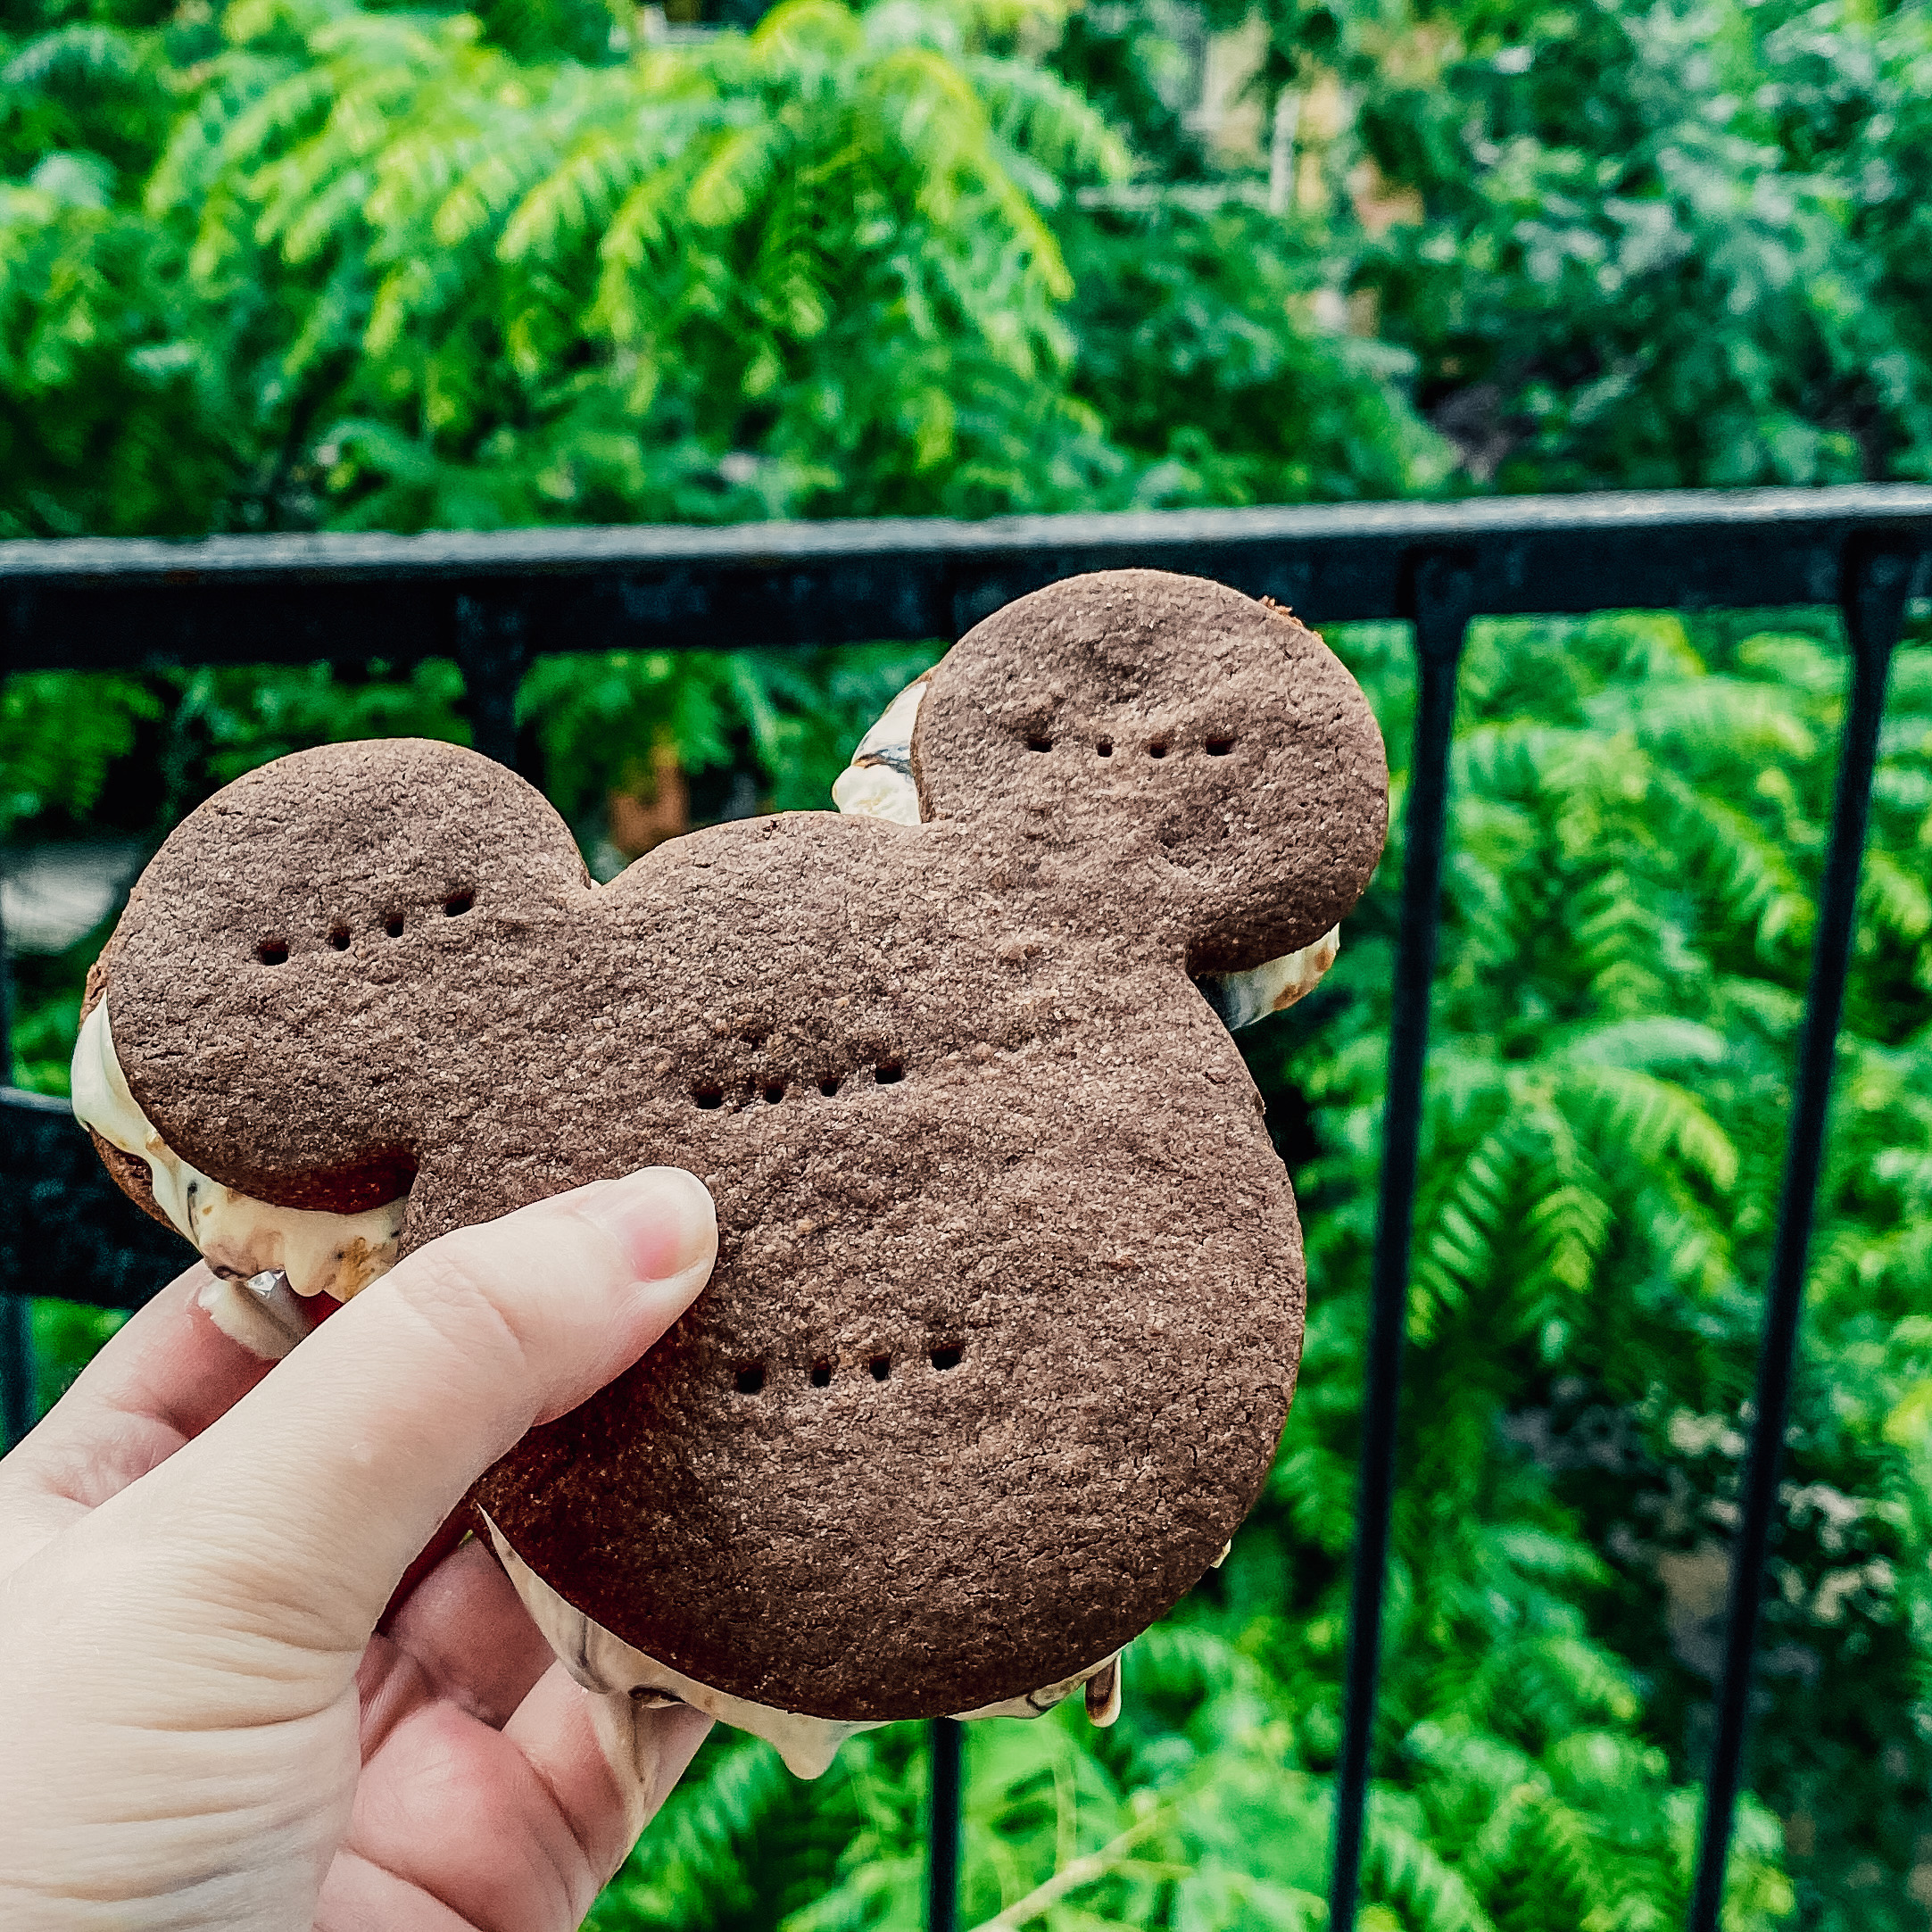 Mickey Ice Cream Sandwiches (Mickey shaped chocolate cookie ice cream sandwich being held against a background of trees)